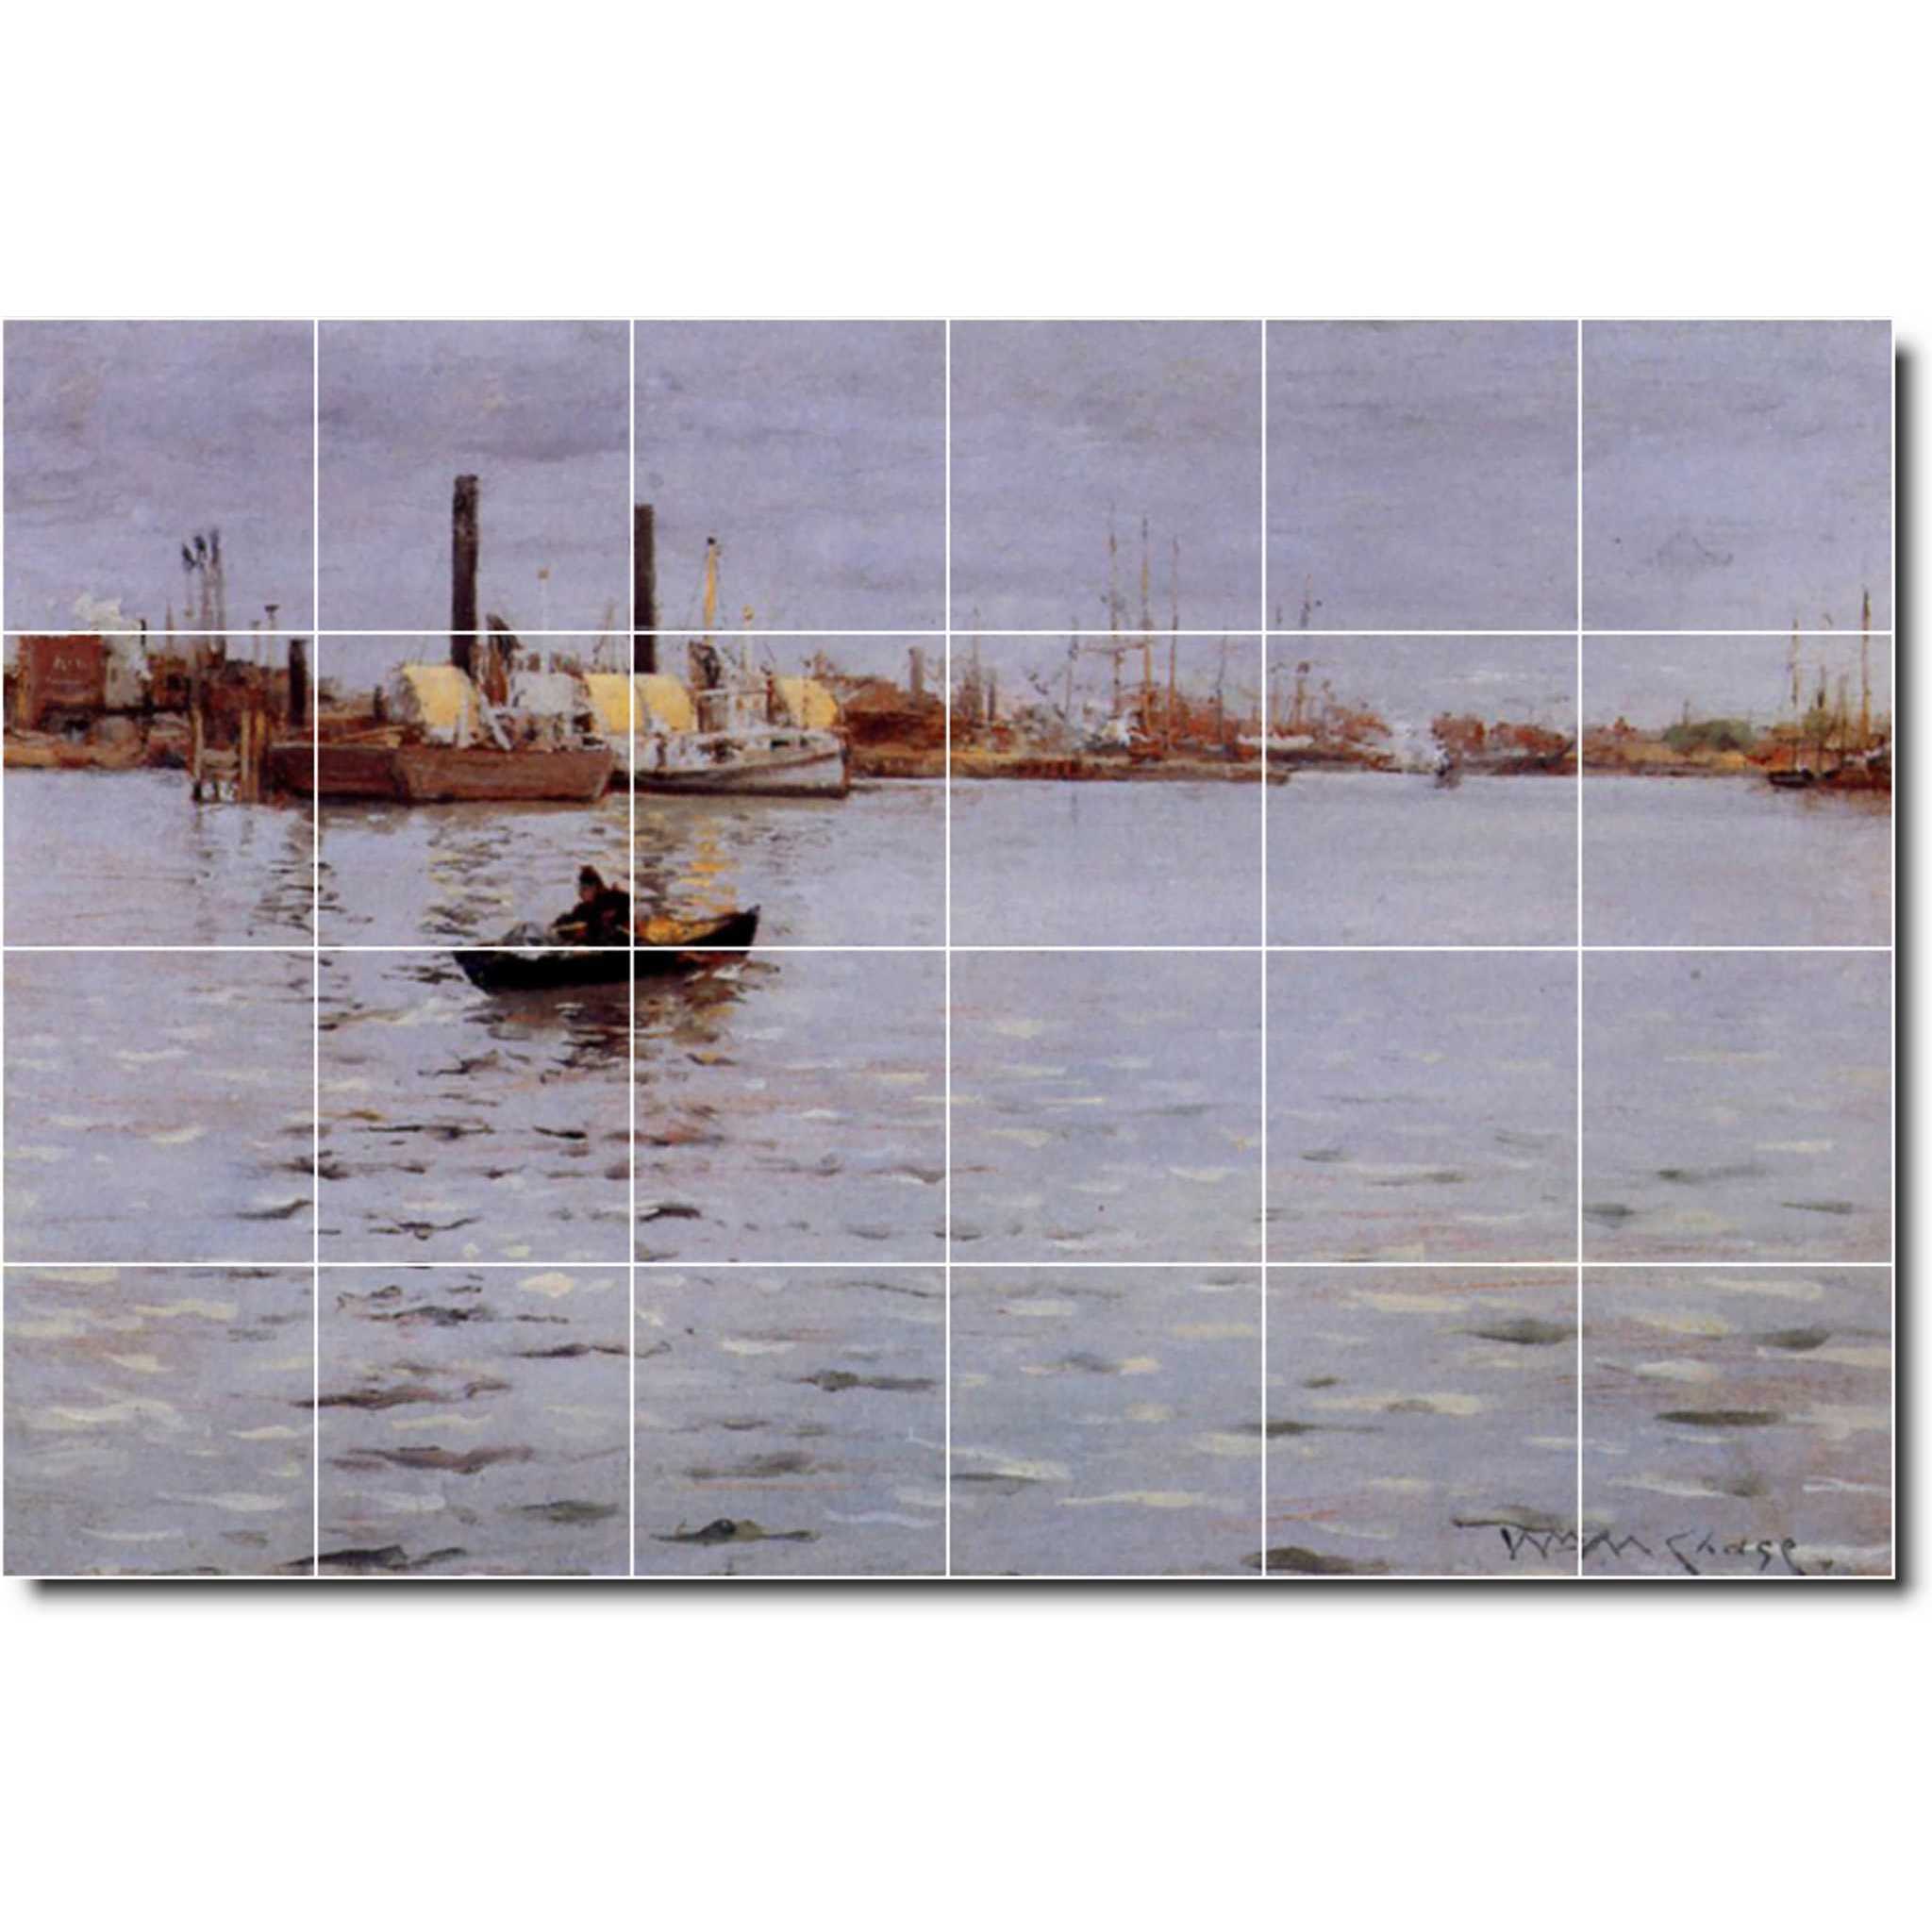 william chase waterfront painting ceramic tile mural p01666